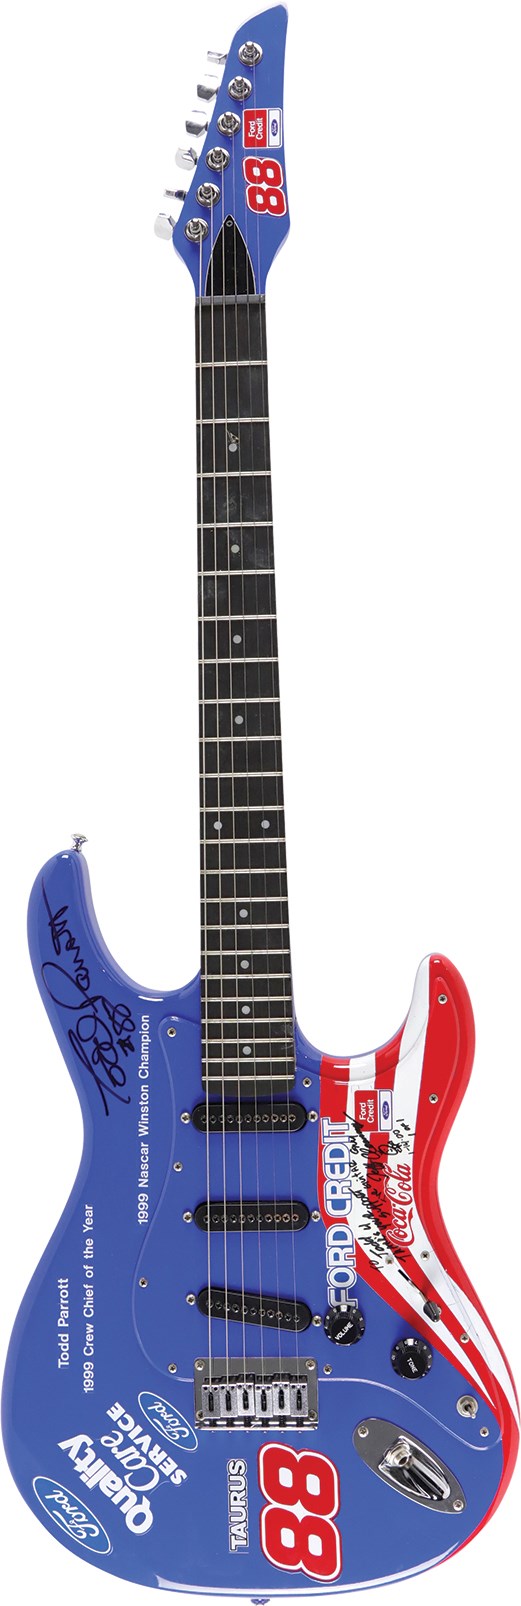 Olympics and All Sports - Todd Parrott 1999 Crew Chief of the Year and 1999 NASCAR Winston Champion Signed Guitar